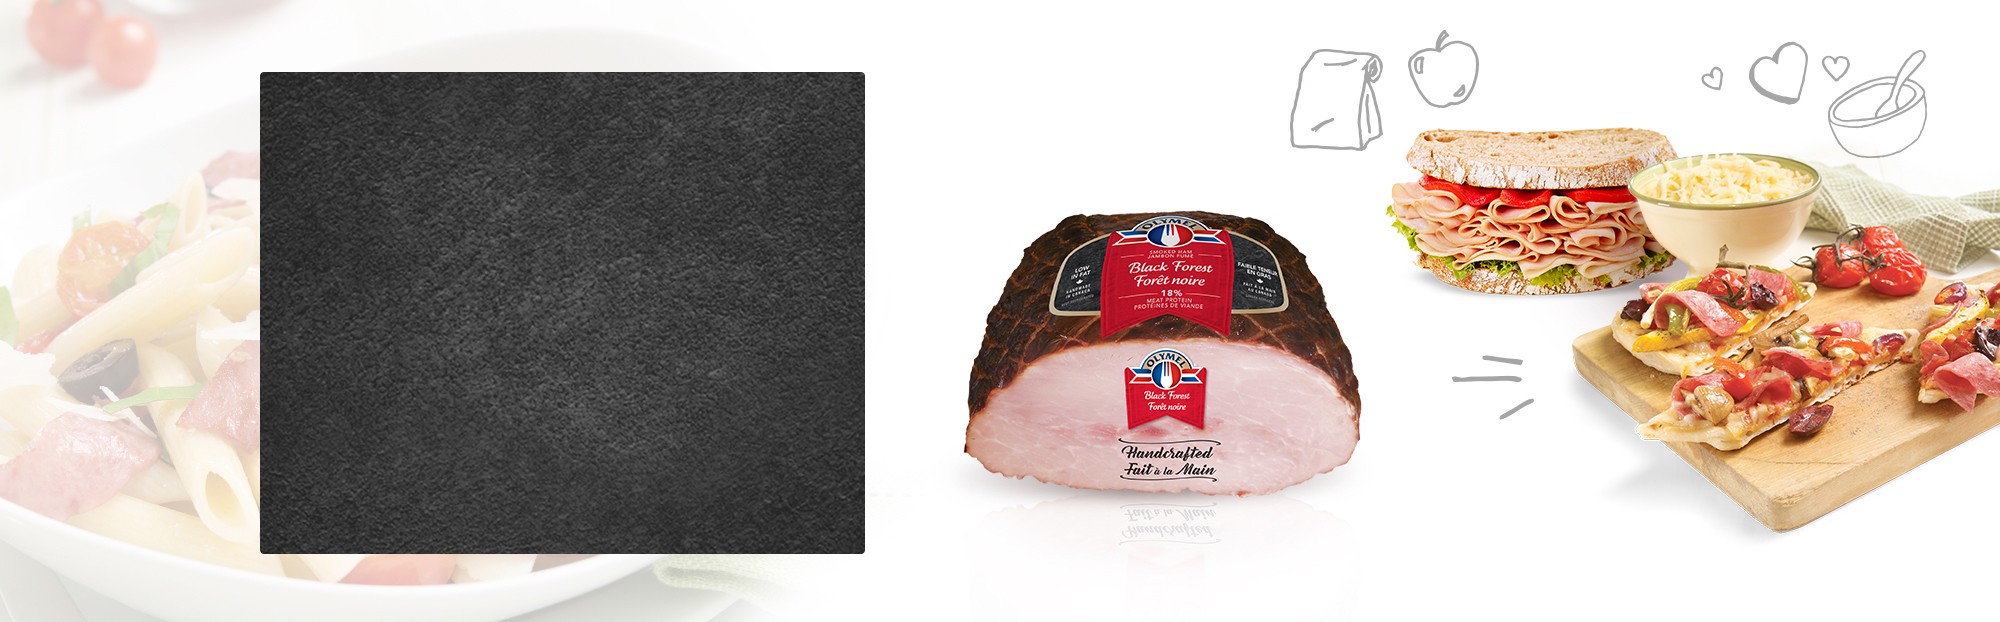 Black Forest Handcrafted Open smoked ham